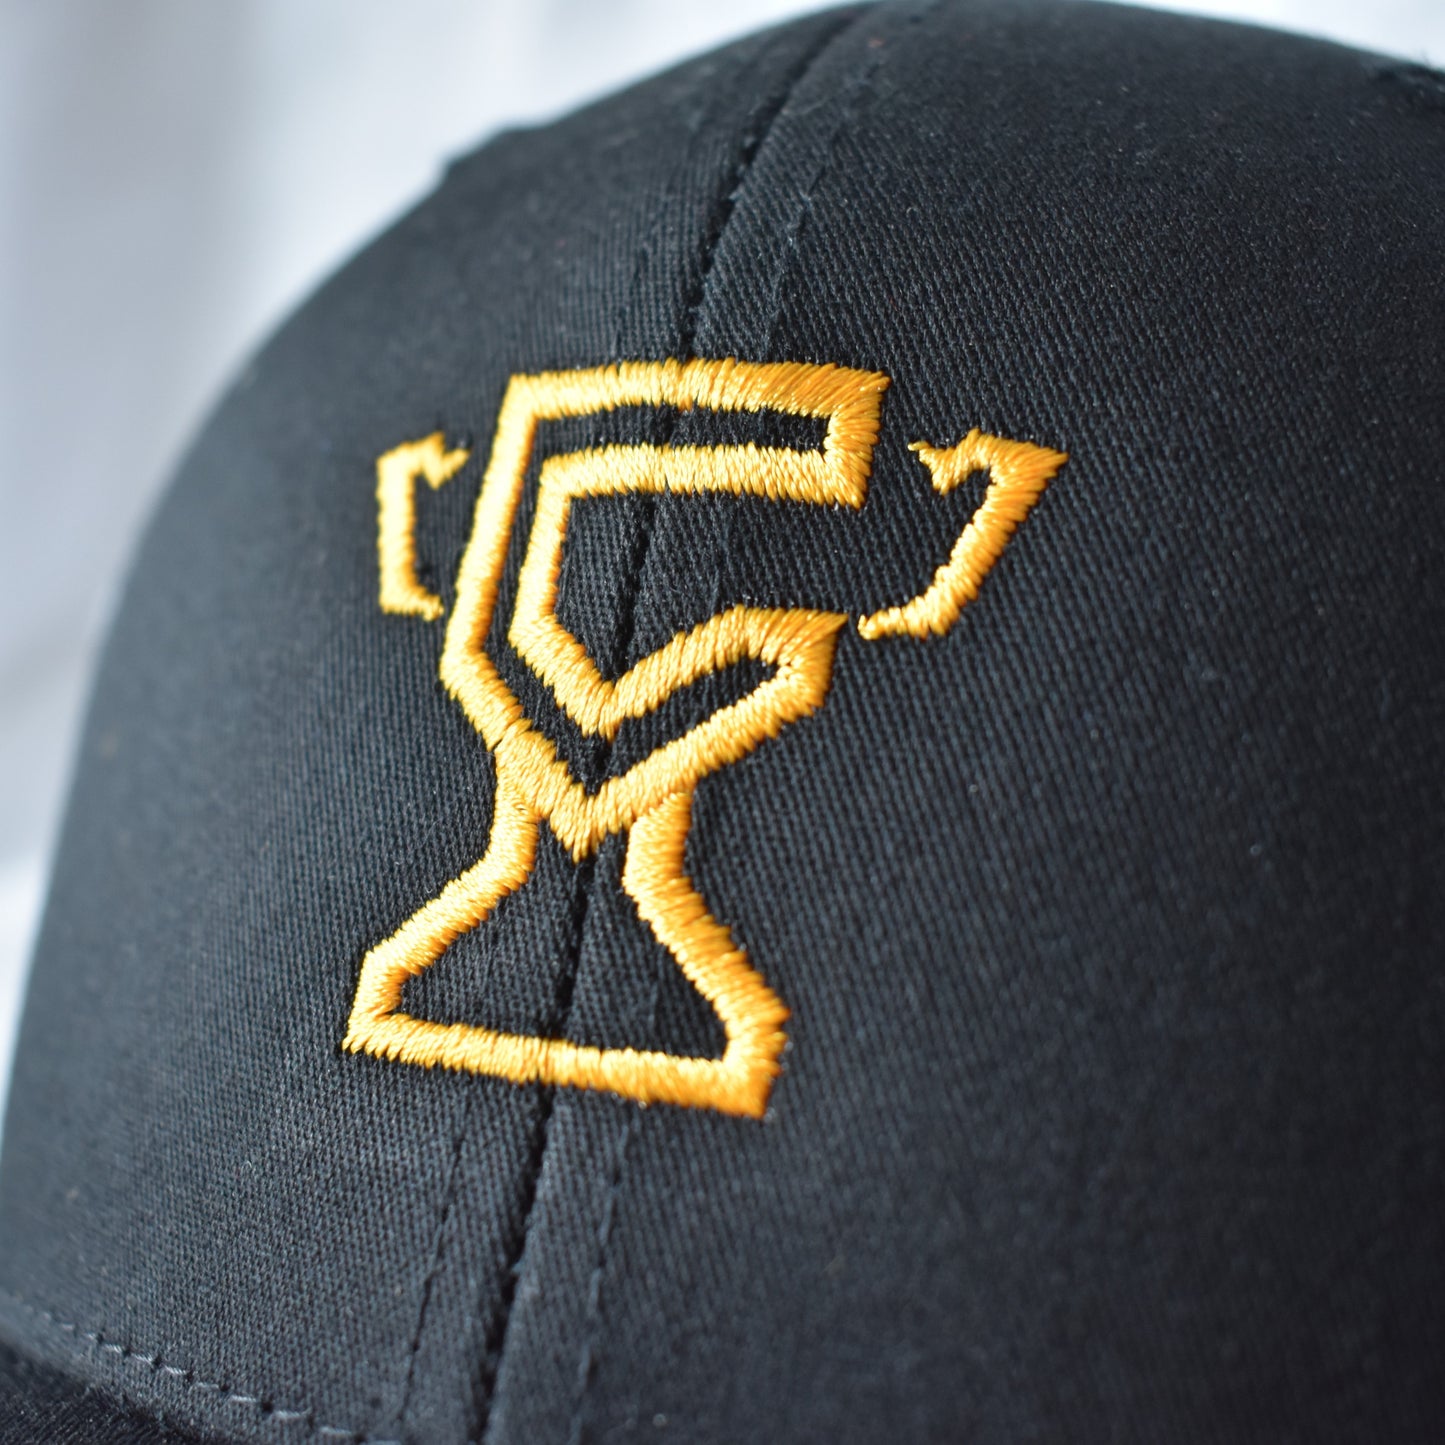 Close up of the Champletes logo on the trucker hat.